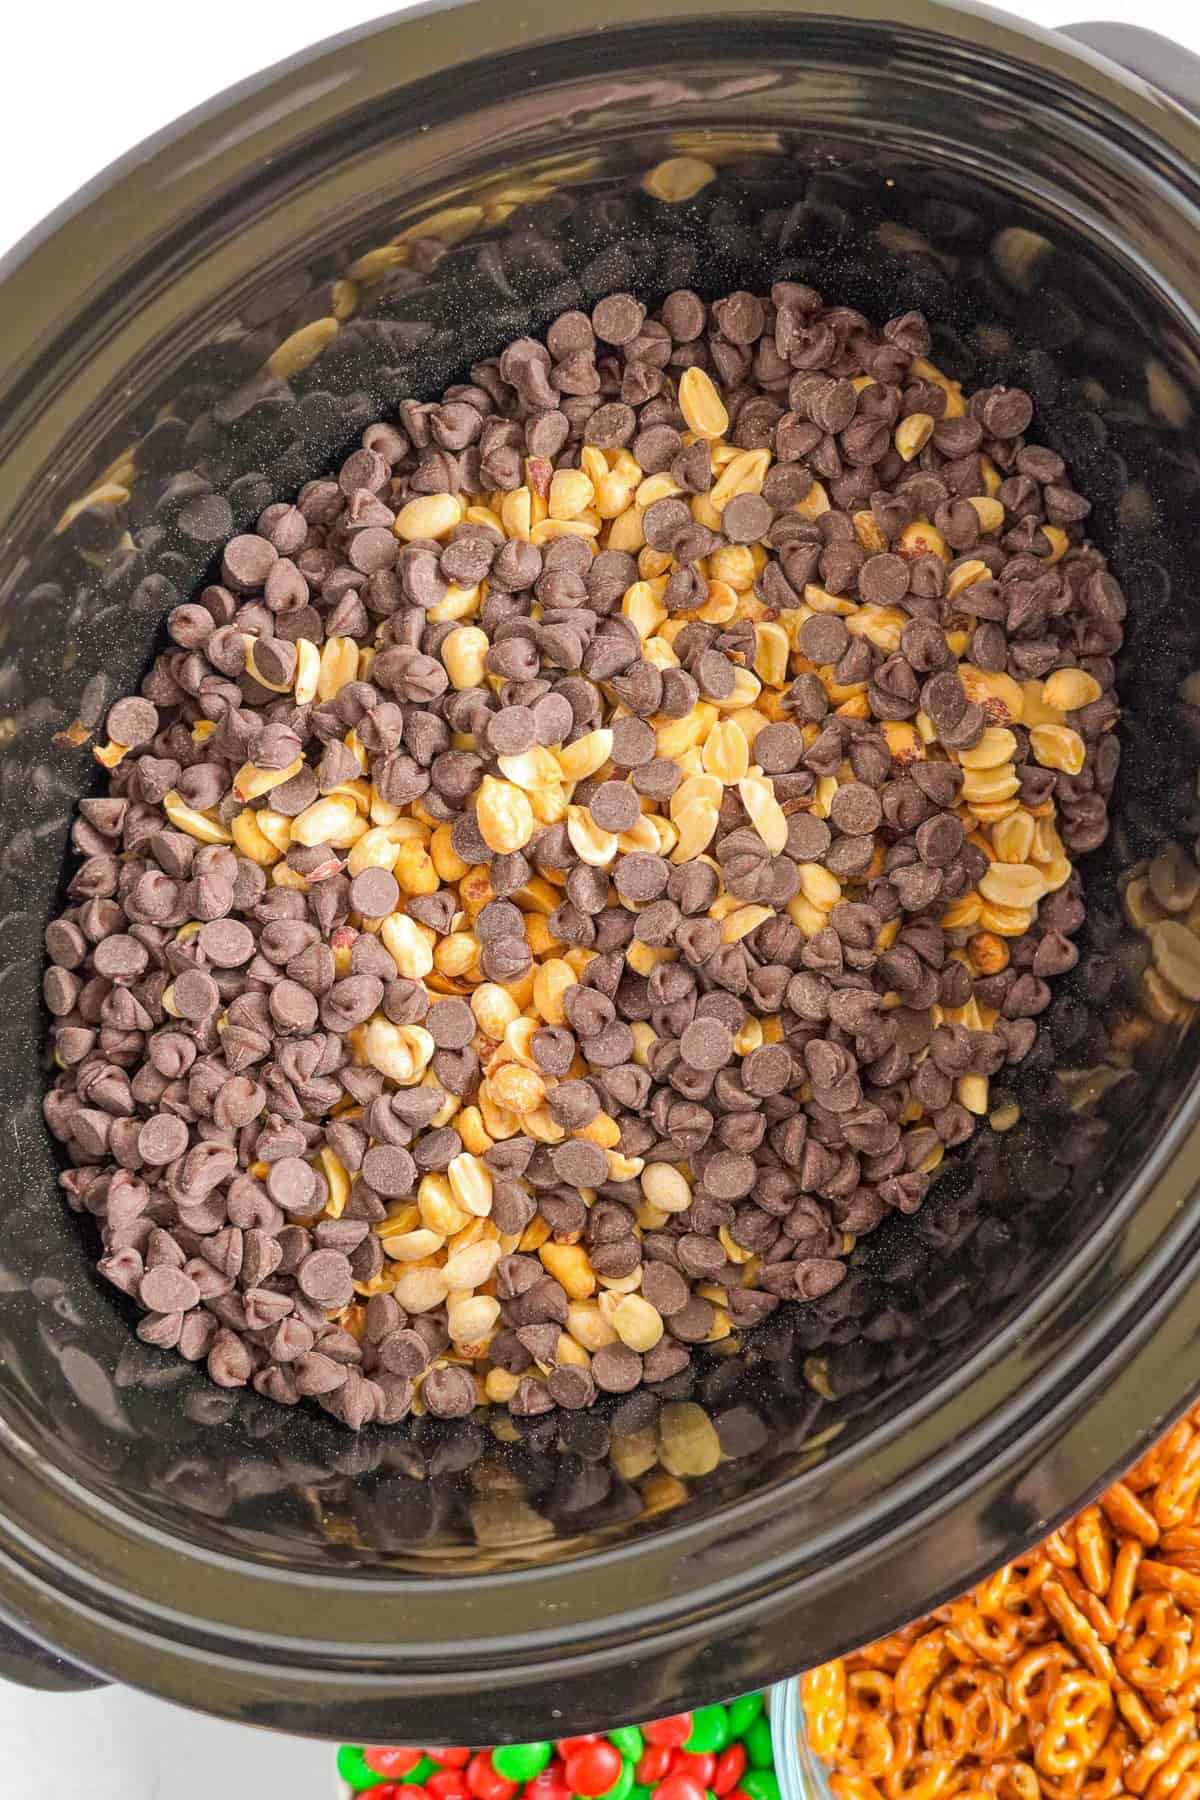 Chocolate chips and peanuts layered in a crockpot from above.